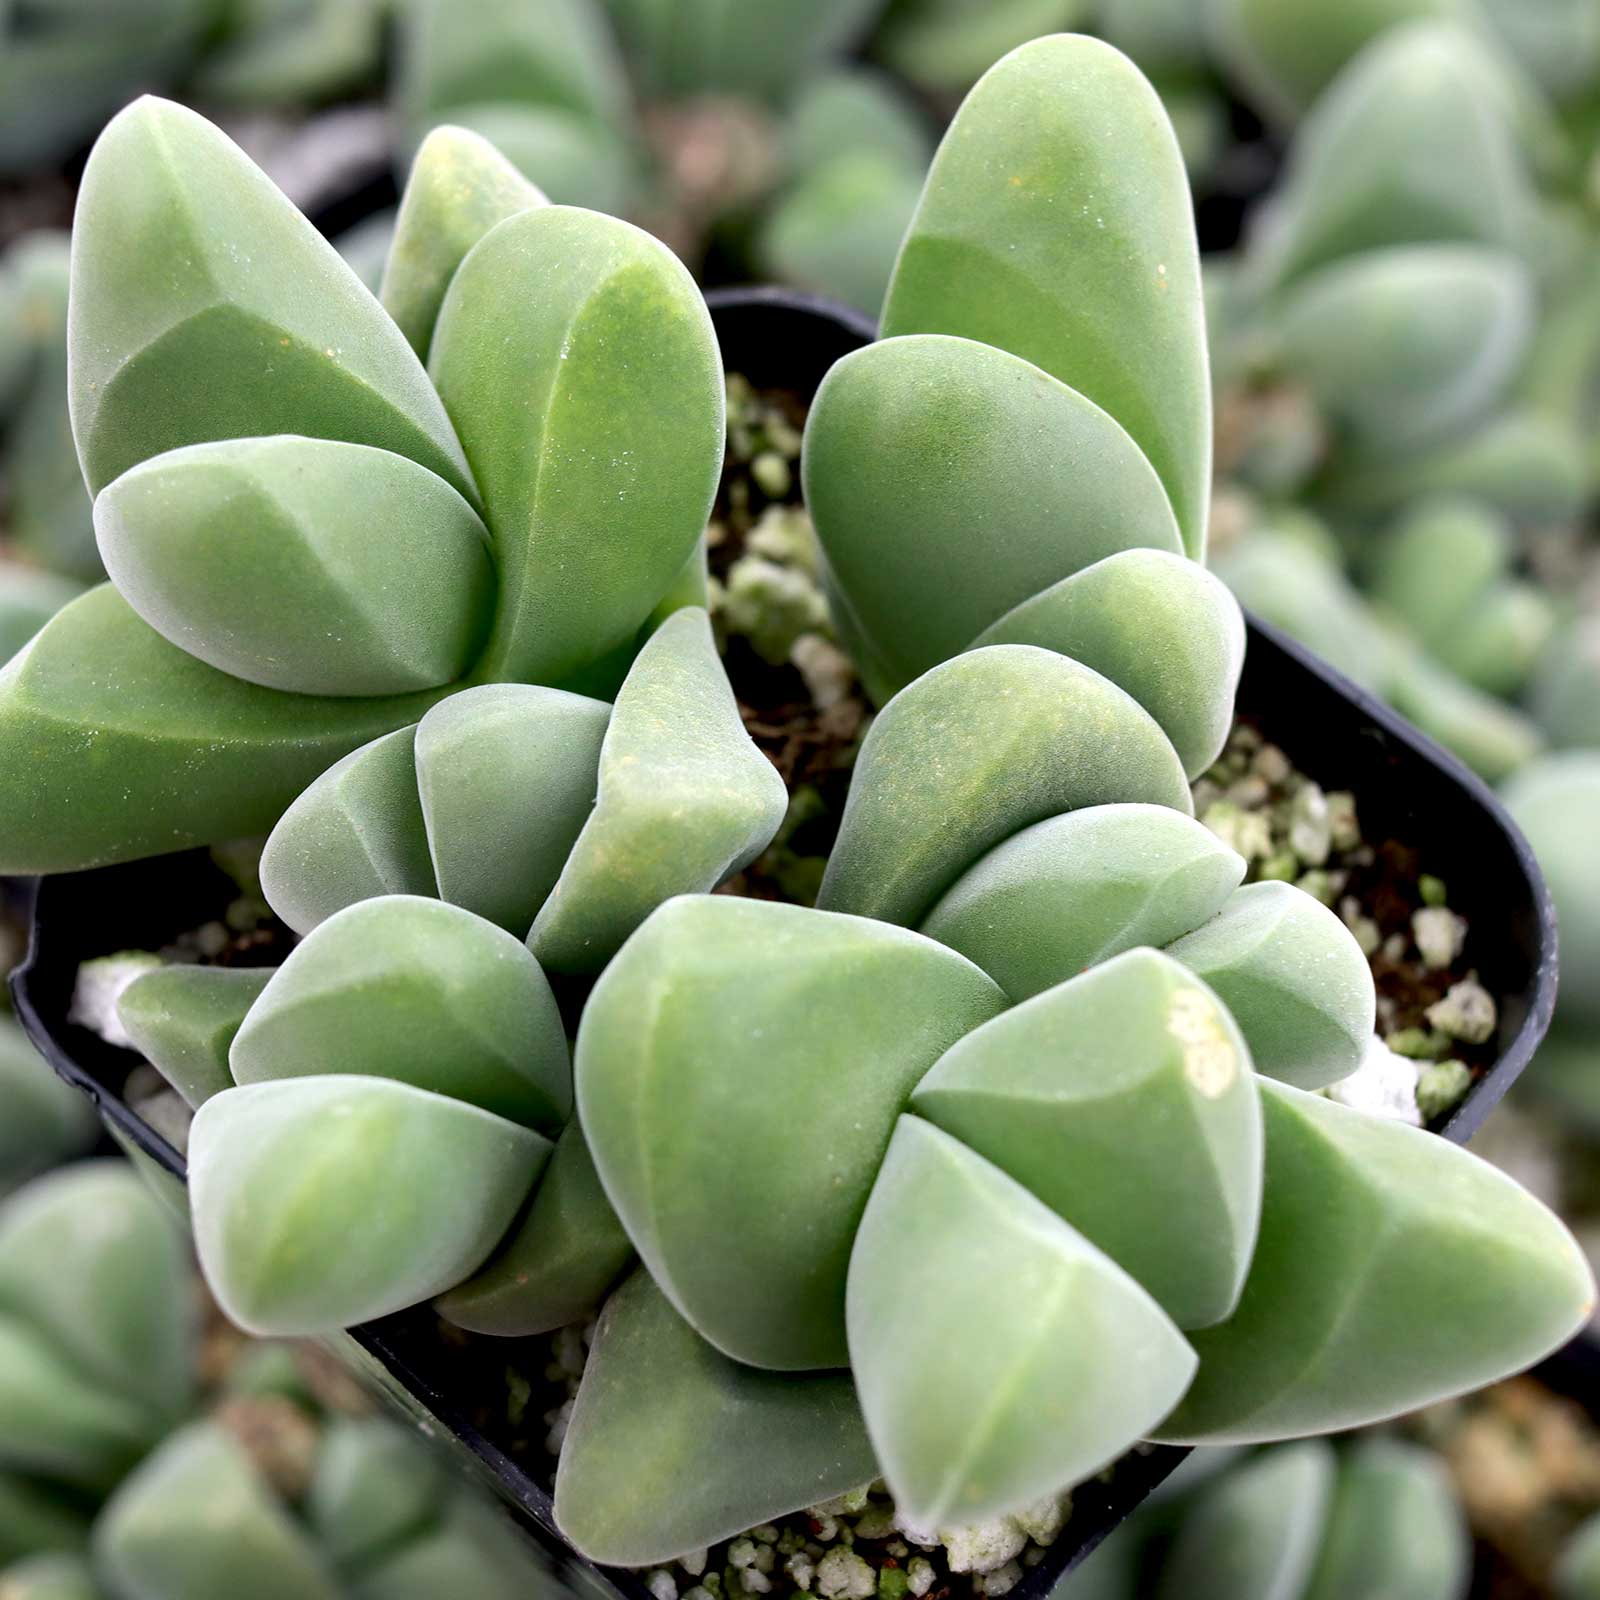 Do dormant and grow seasons only apply to outdoor succulents?